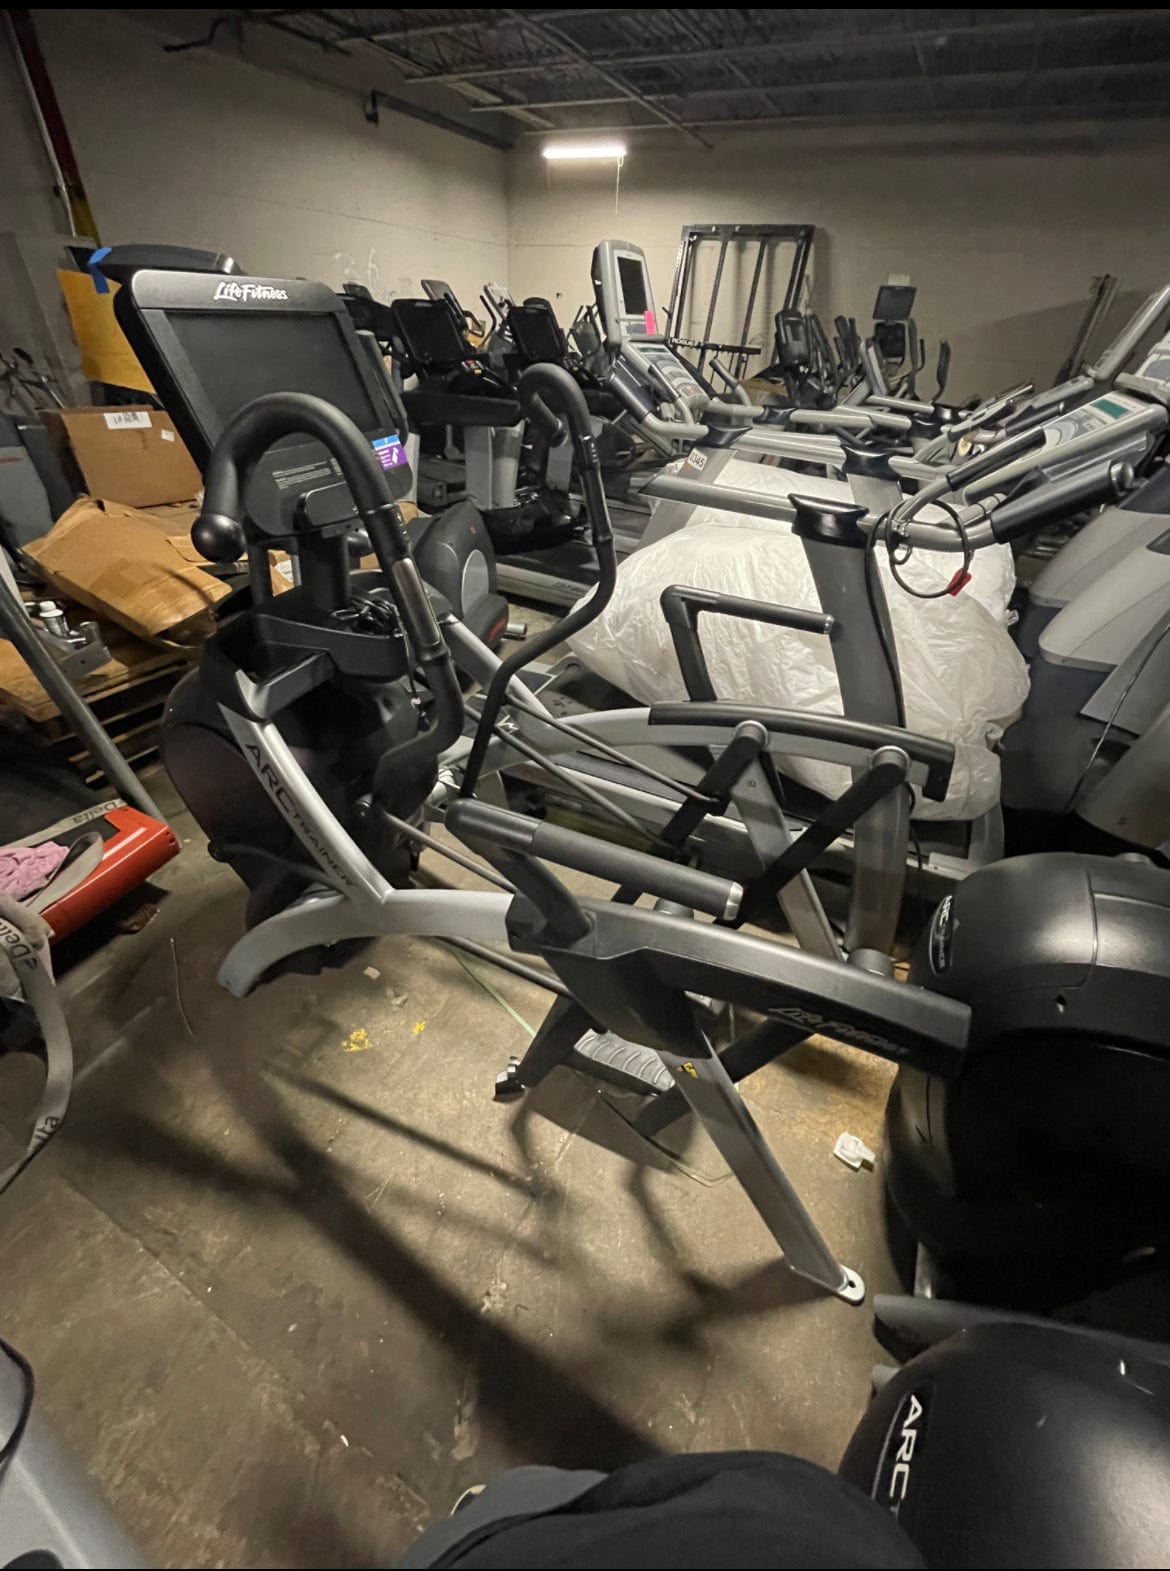 RTC Fitness Equipment 992 - Sporting Goods > Exercise & Fitness > Cardio > Cardio Machines > Elliptical Trainers Life Fitness Total Body Arc Trainer